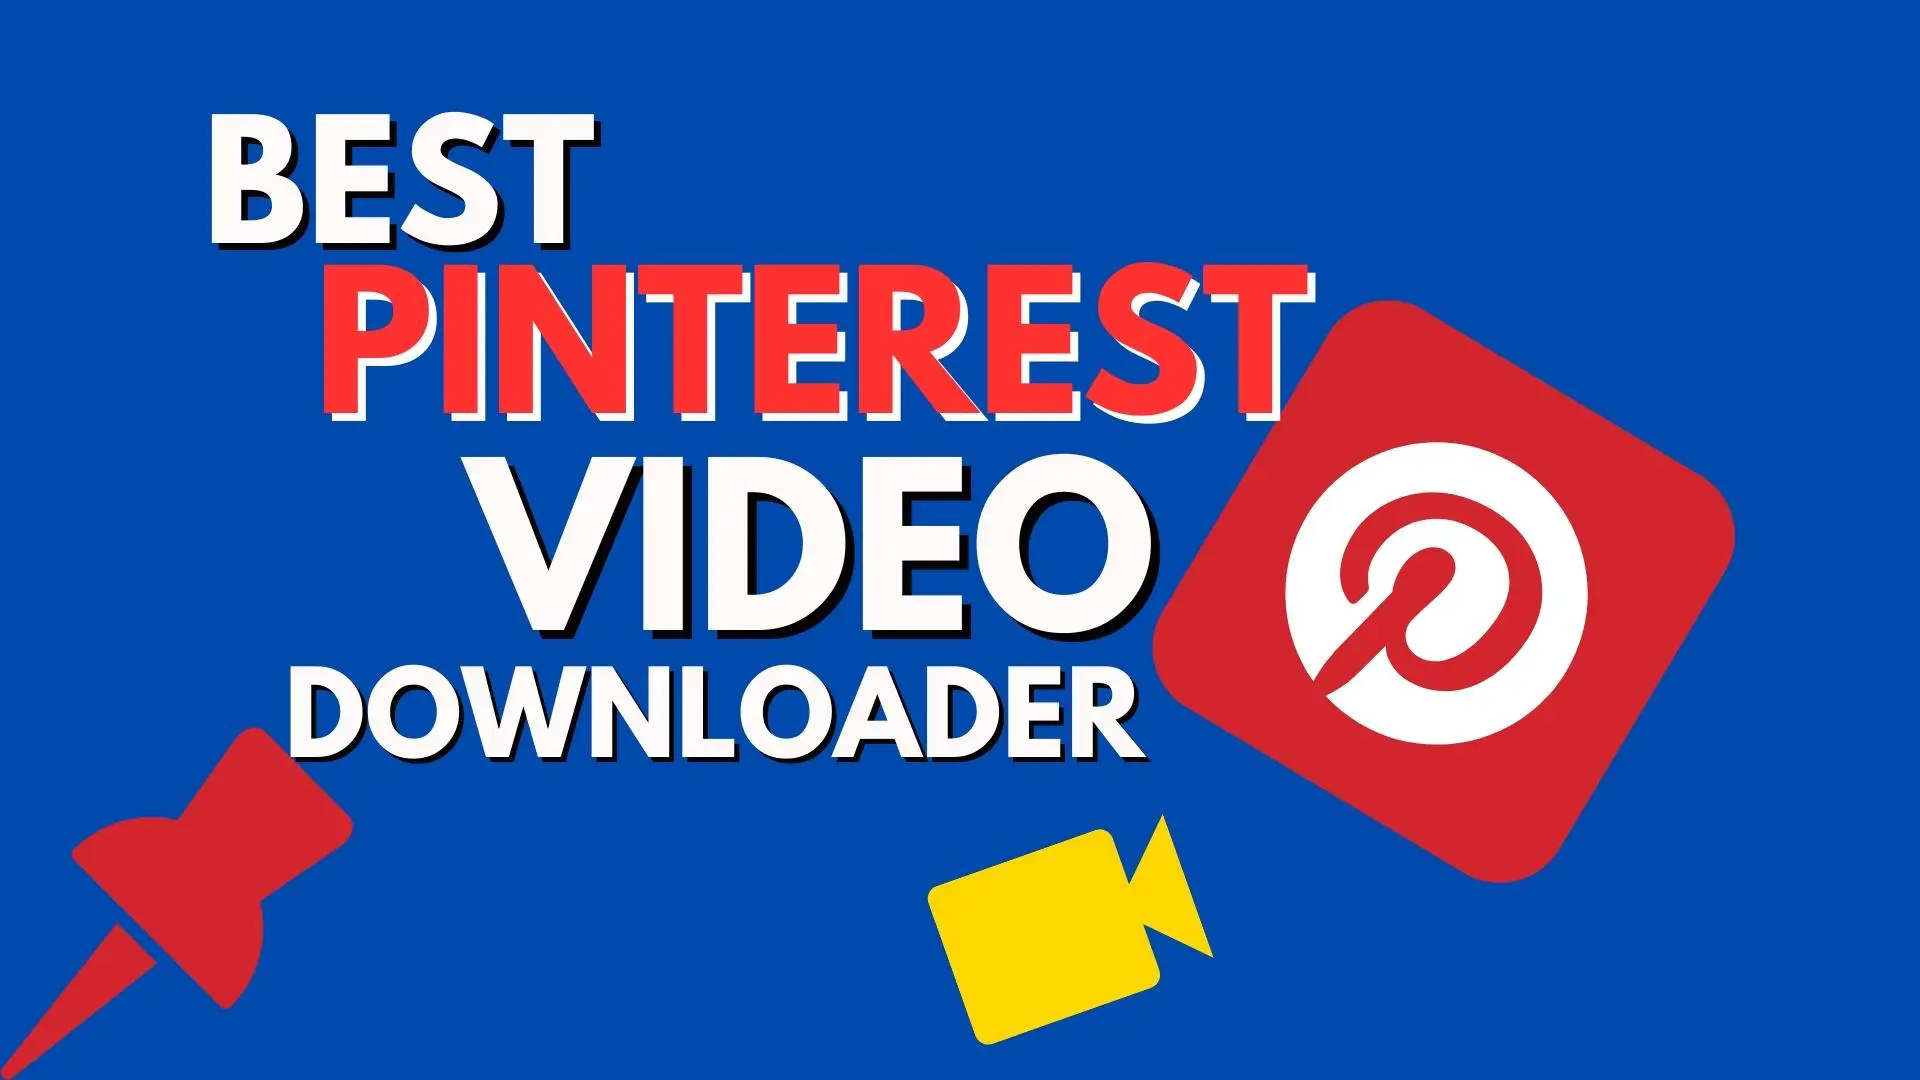 Best Pinterest Video Downloader: How to Download Video and Image